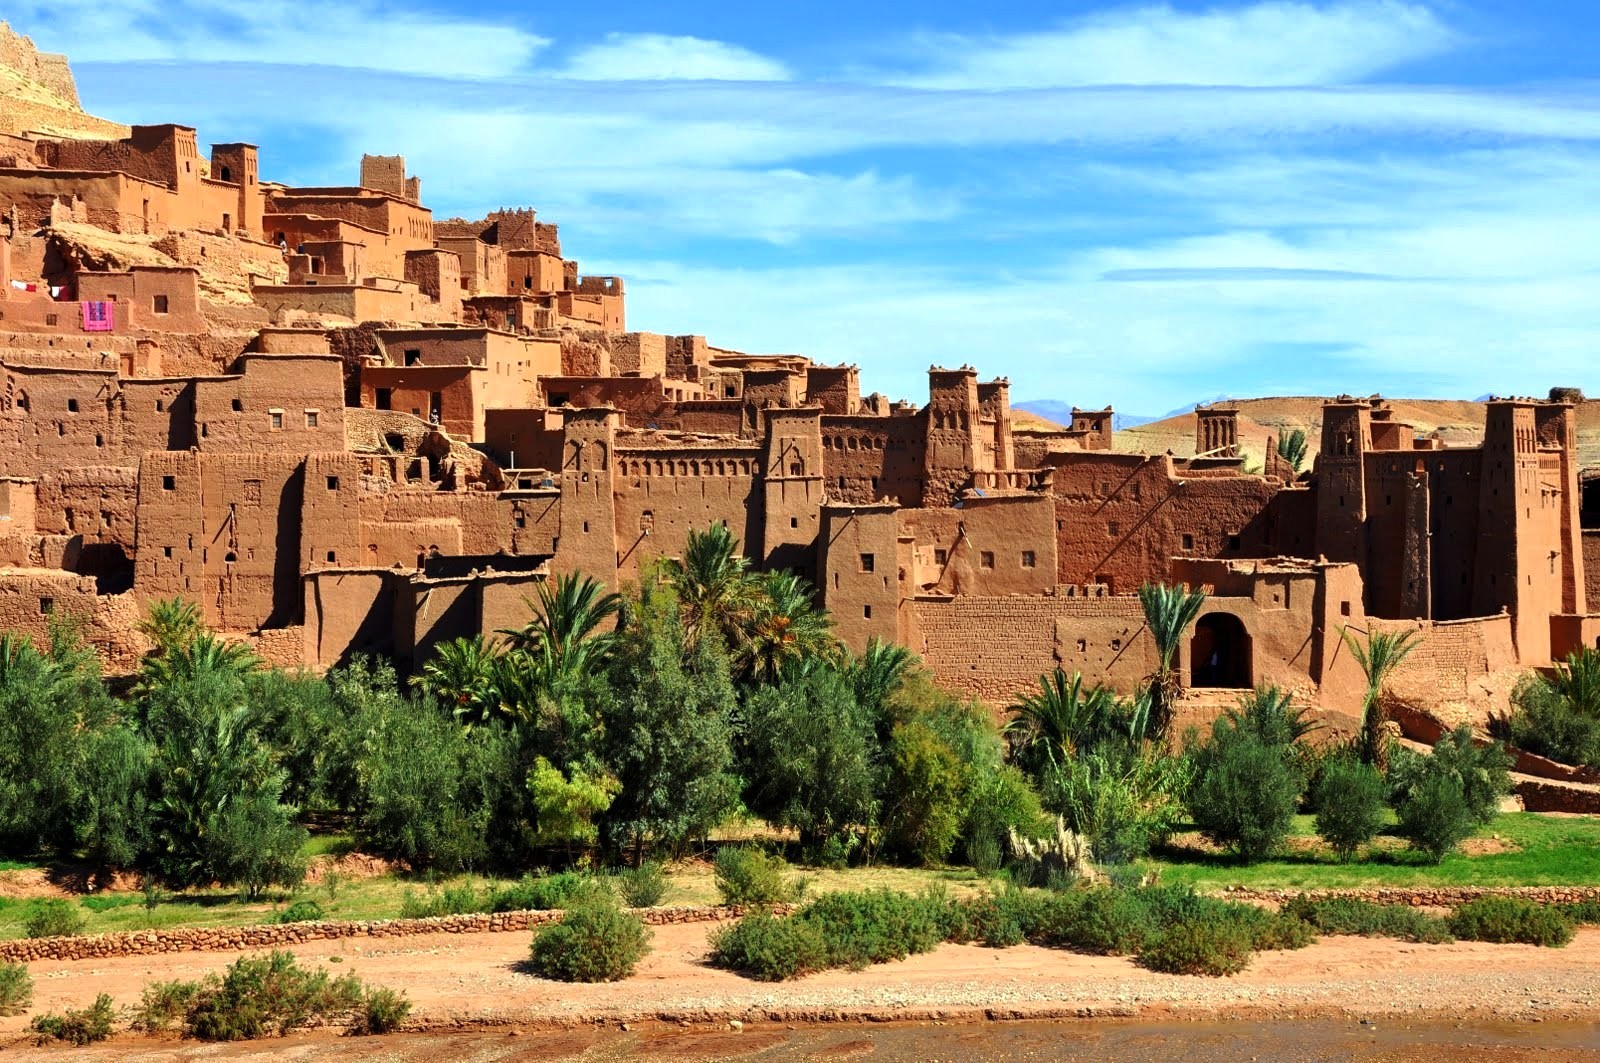 04 days Morocco desert tour to Merzouga from Fes ending in Marrakech to explore the South of Morocco.